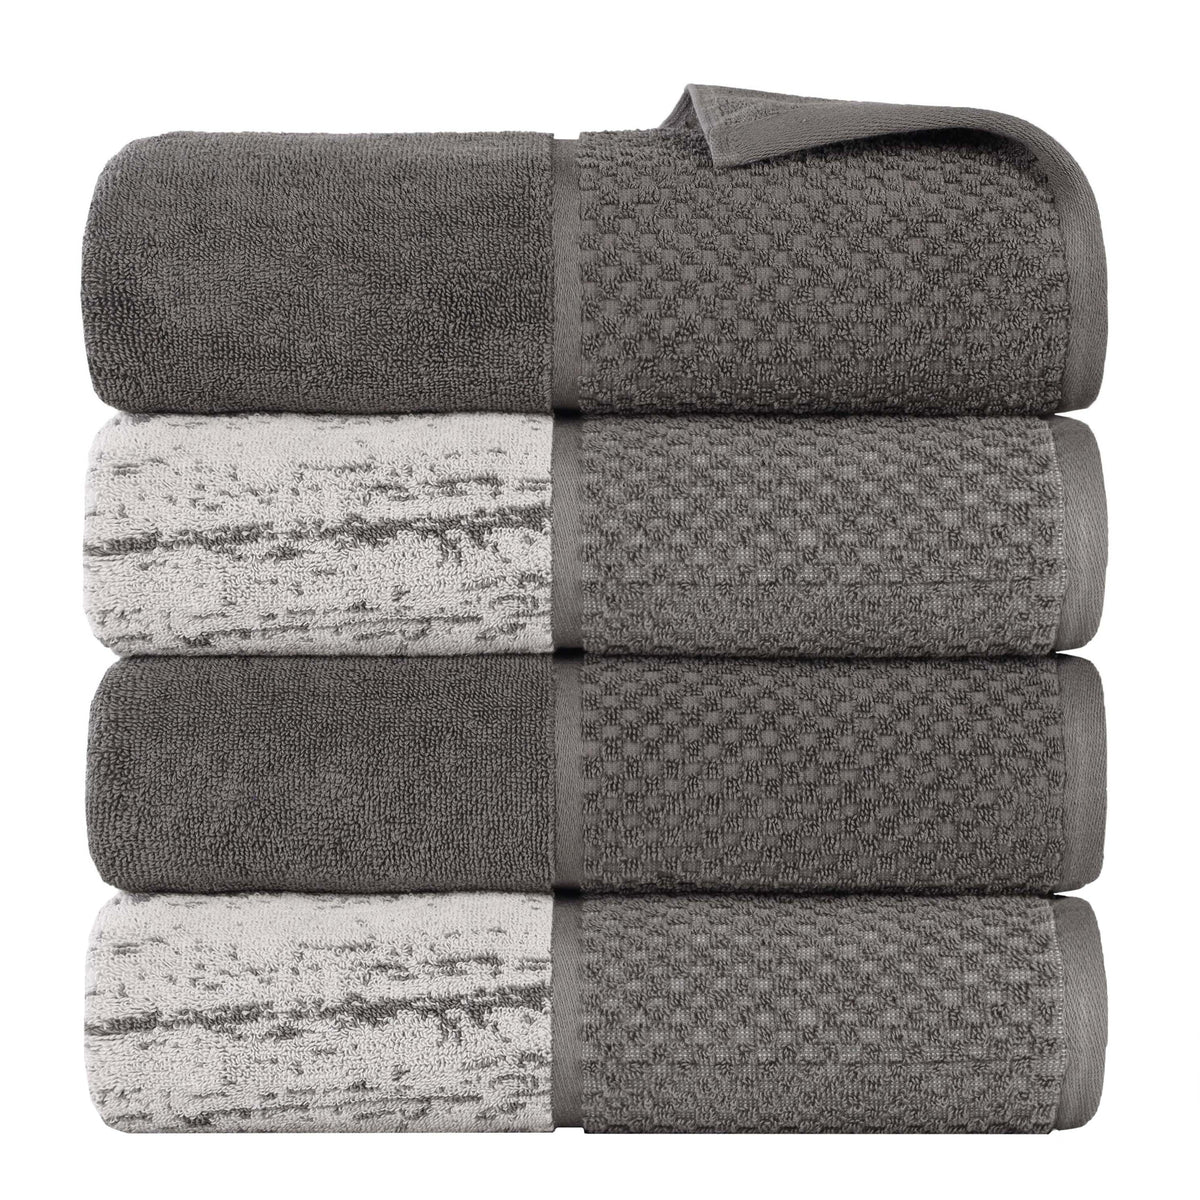 Lodie Cotton Jacquard Solid and Two-Toned Bath Towel Set of 4 - Charcoal-Silver